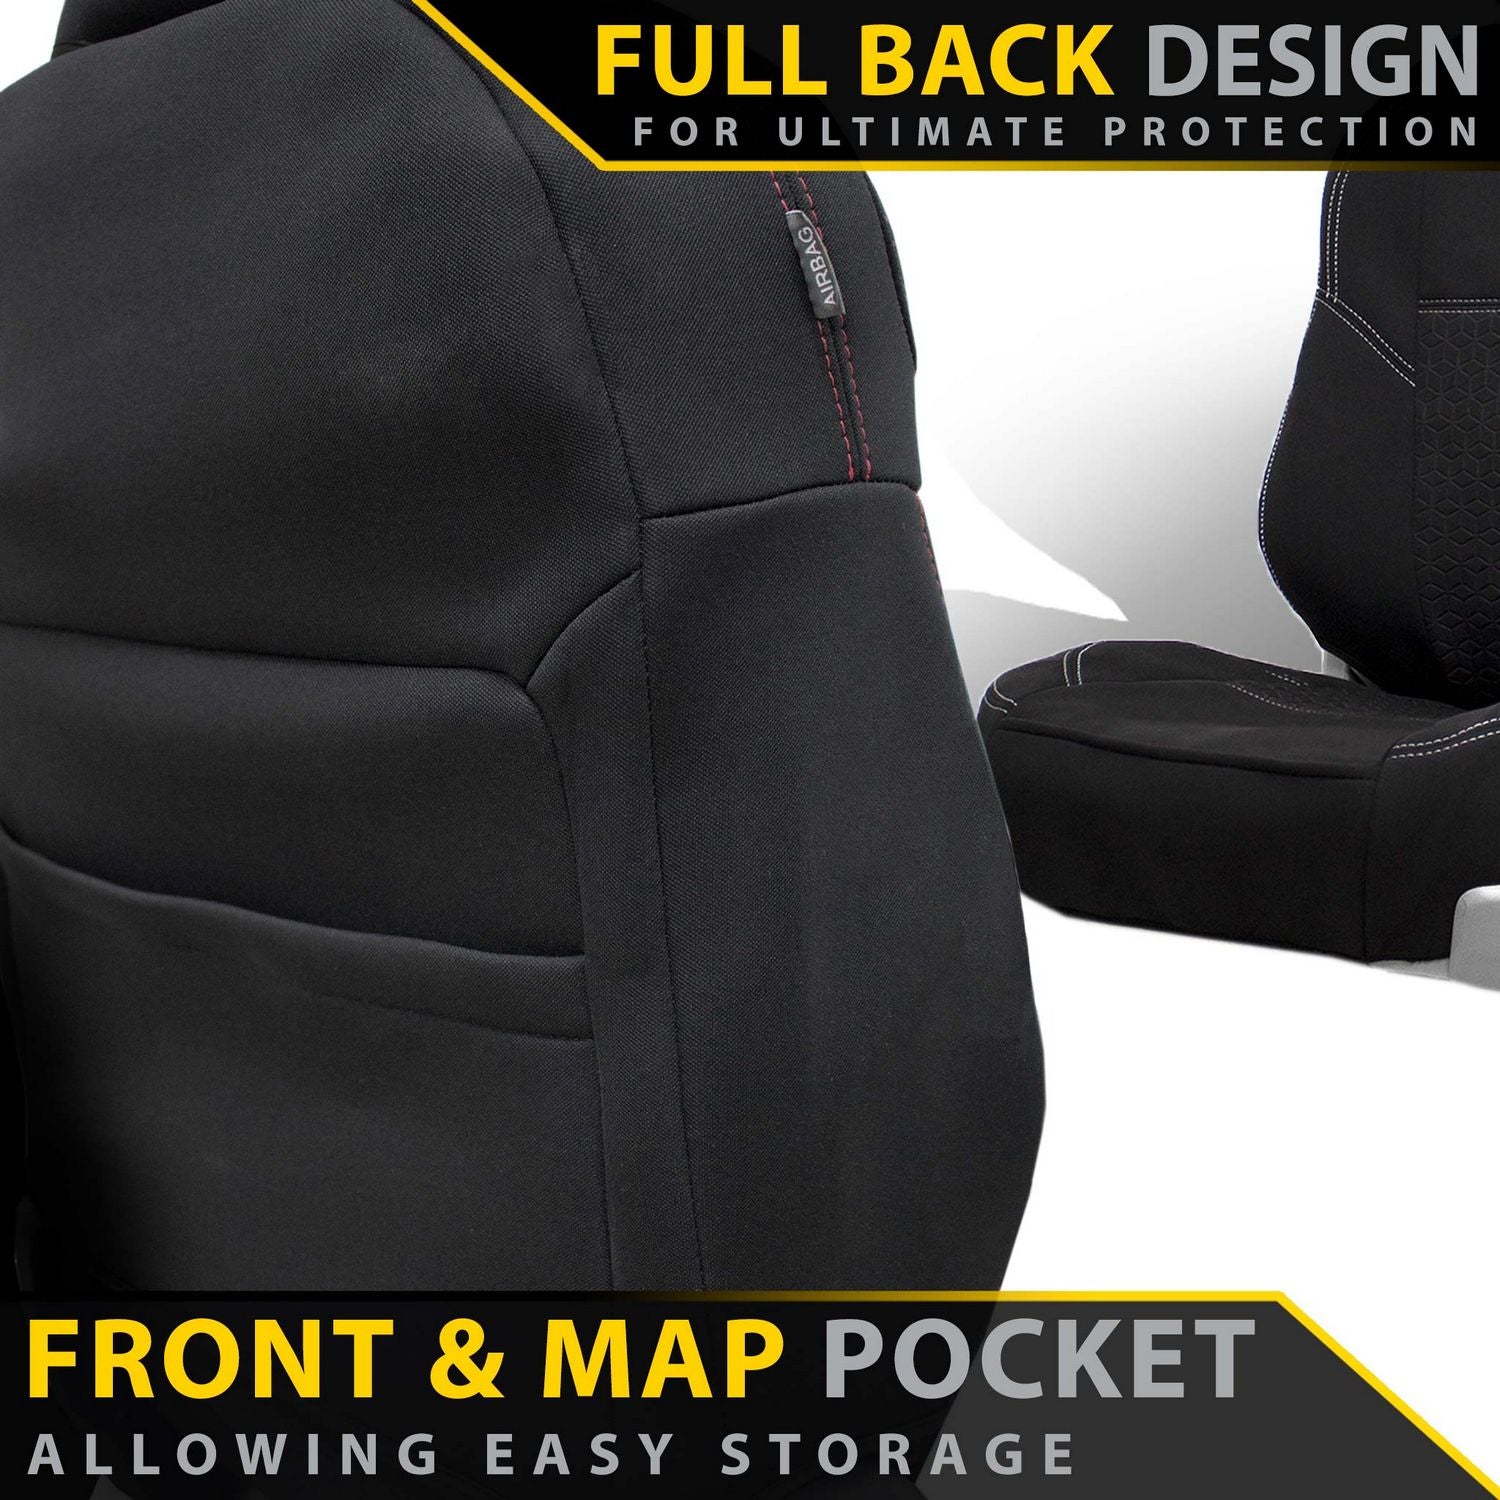 Volkswagen All-New Amarok Premium Neoprene 2x Front Row Seat Covers (Made to Order)